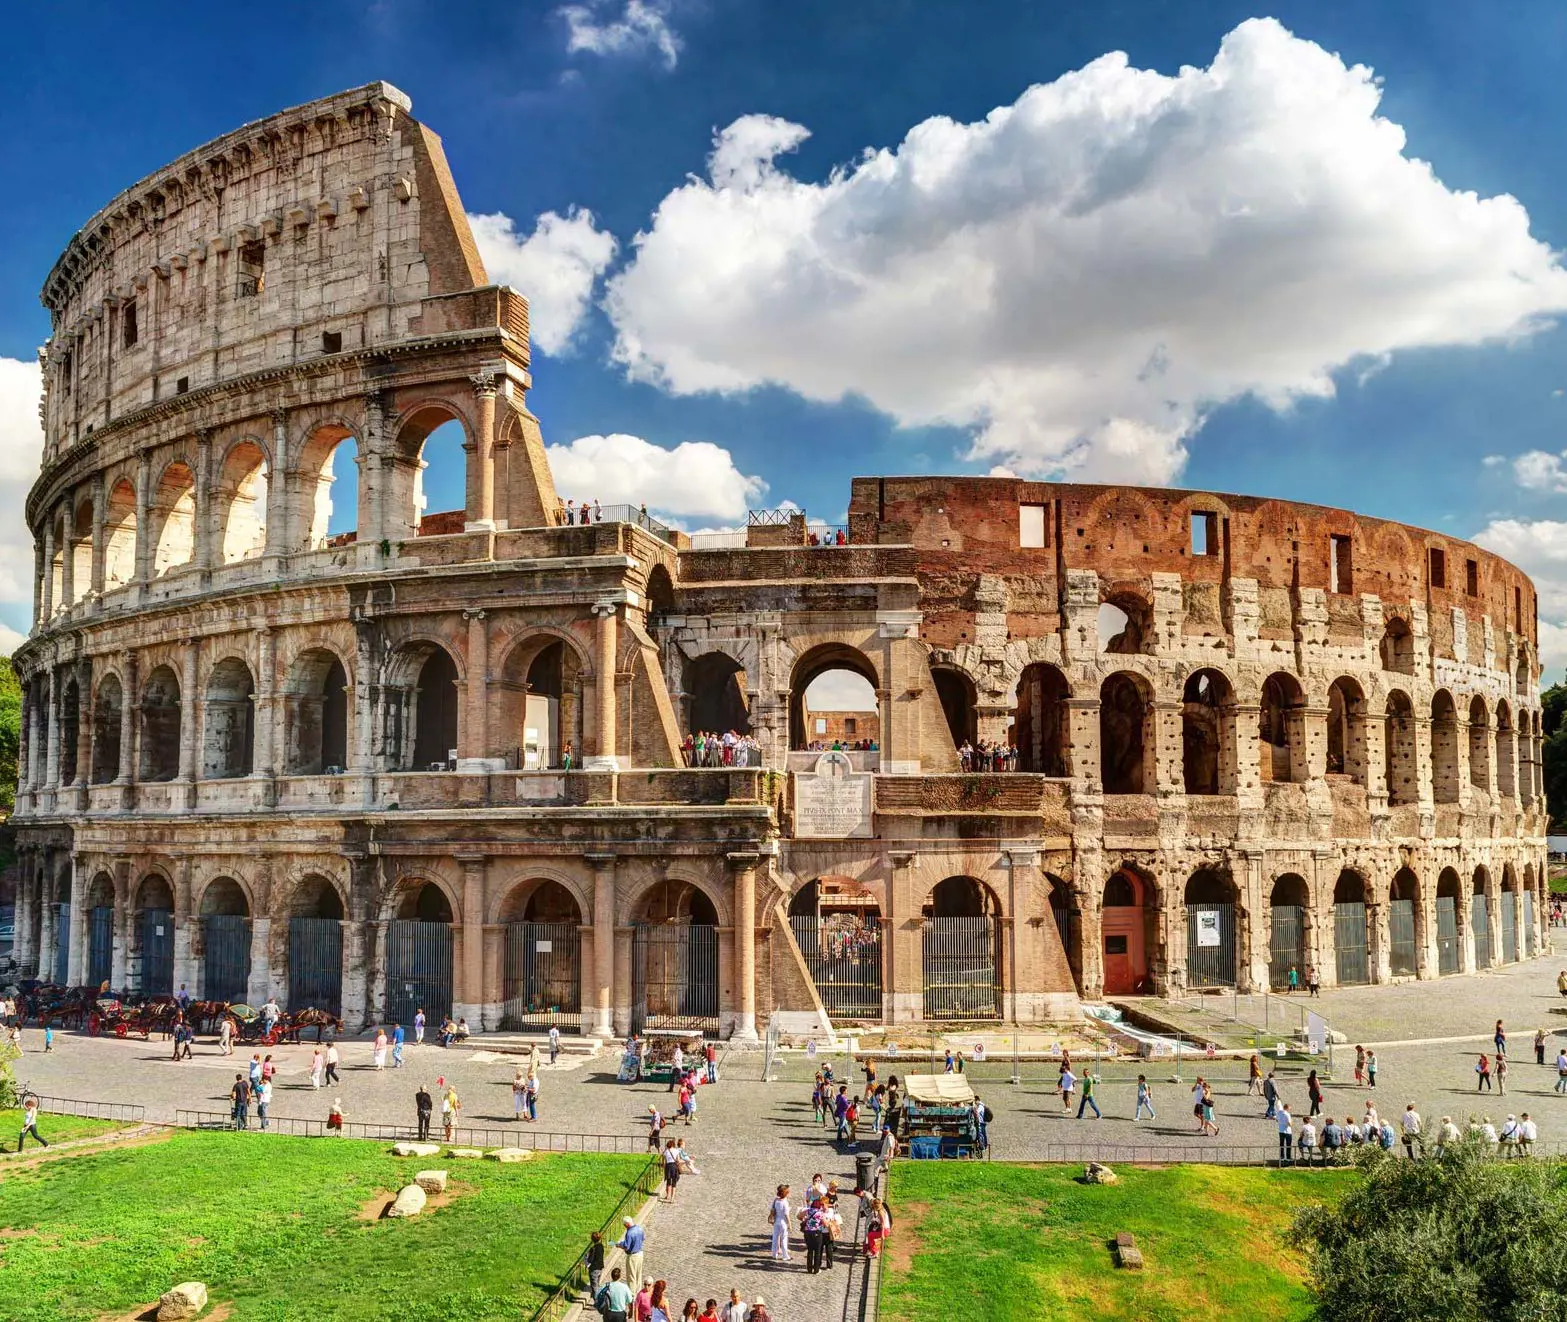 The Colosseum resides in the city of Rome and attracts millions of tourist every year